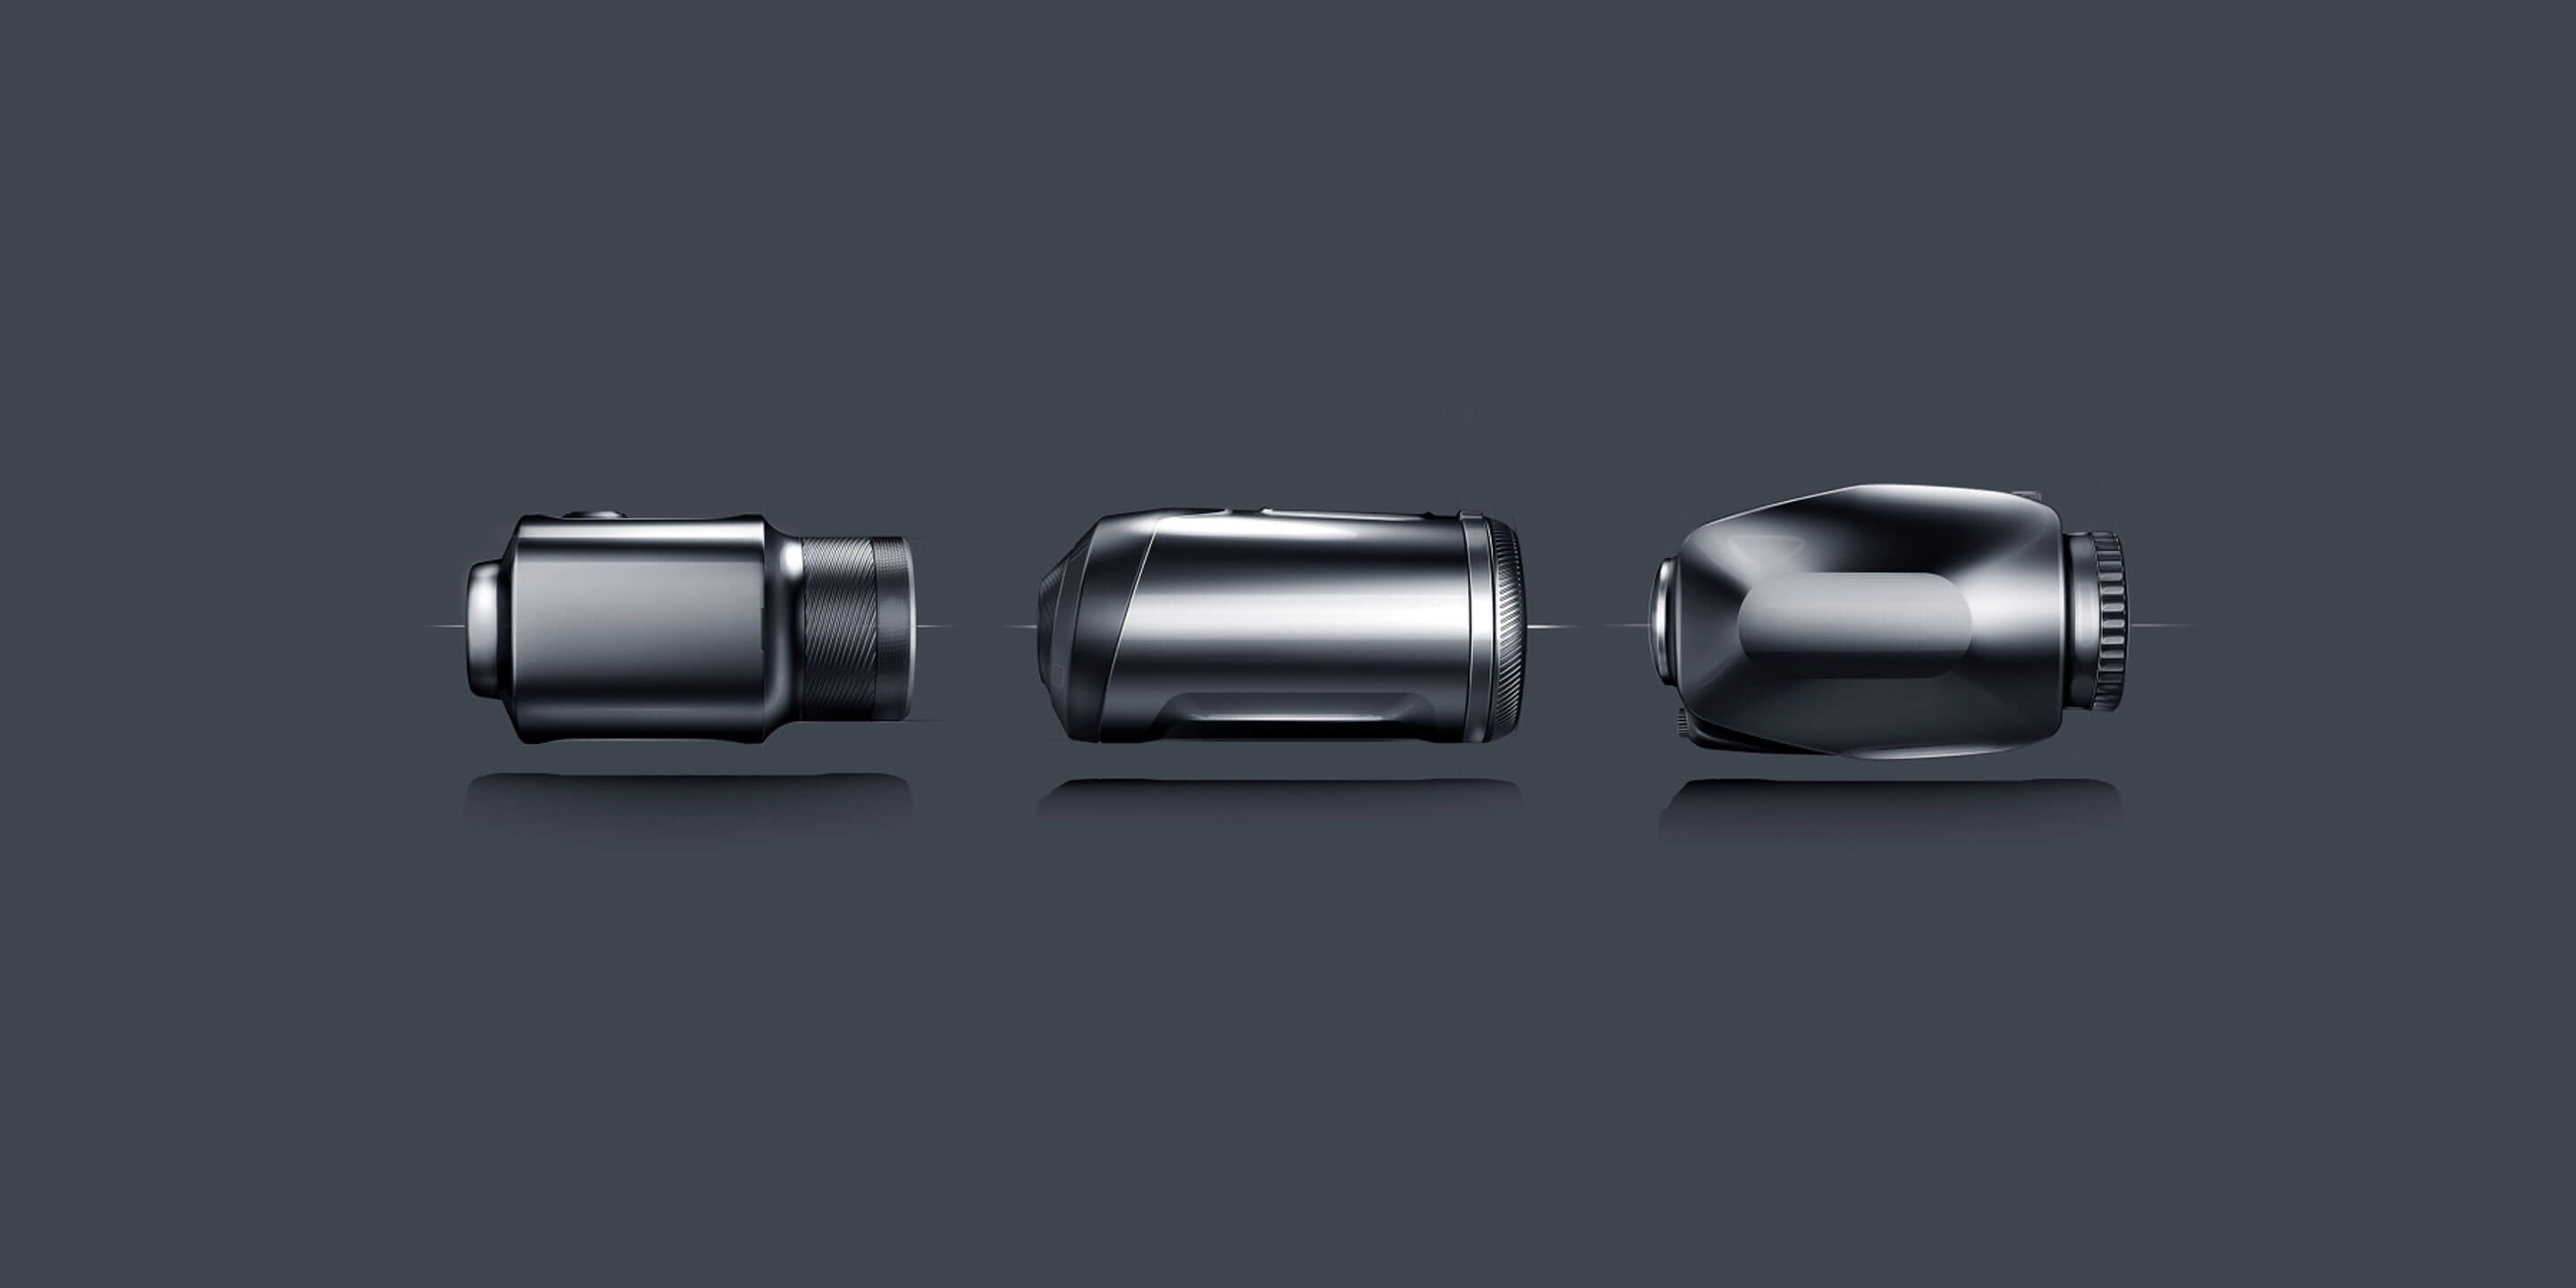 The three design stages of the monocled inspired night vision camera.